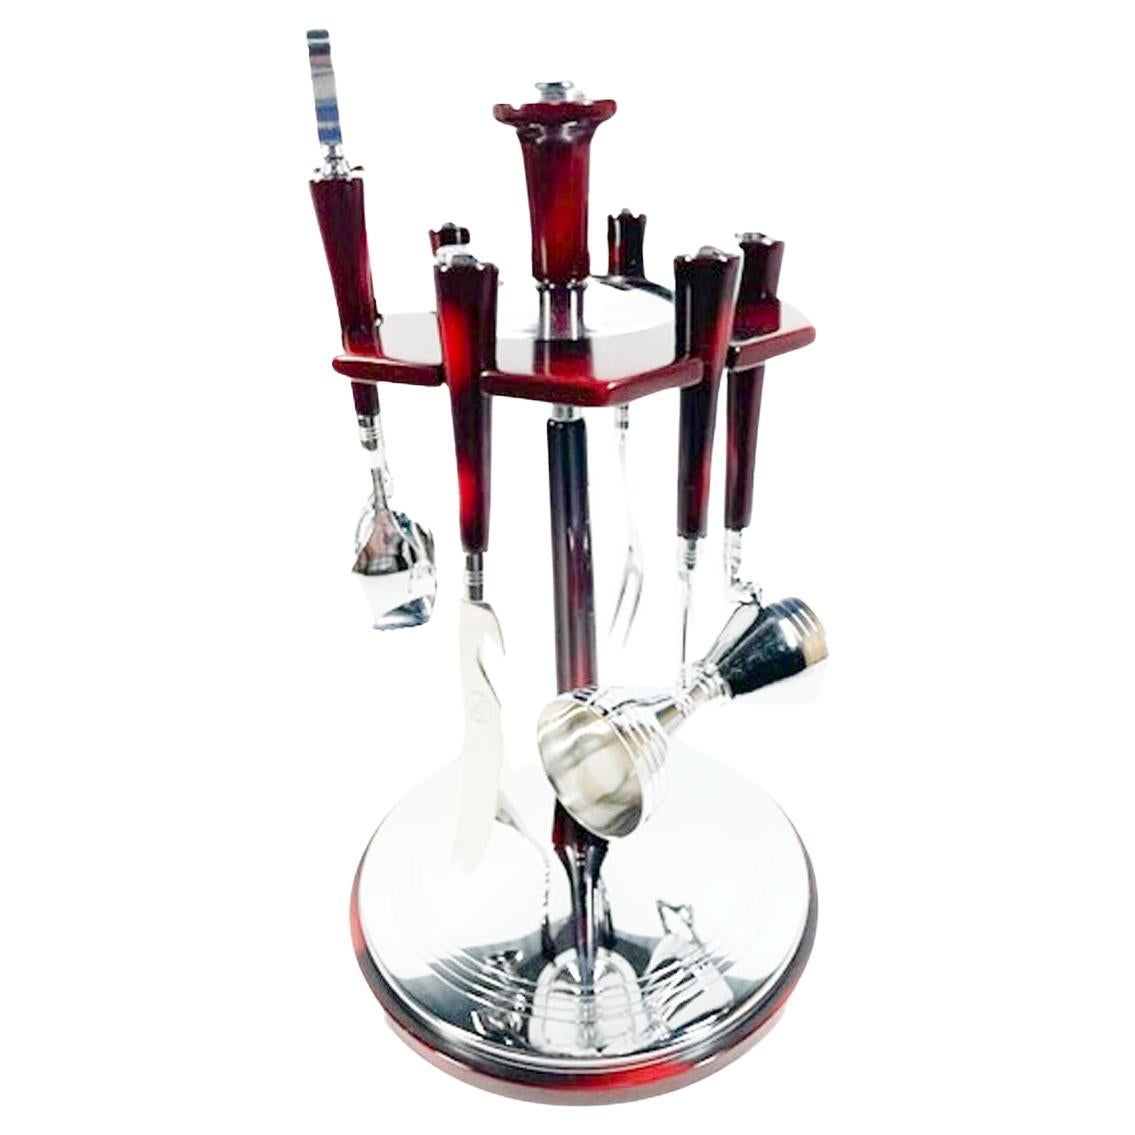 Glo-Hill 6 Piece Bar Tool Set with Carousel Stand in Cherry Bakelite and Chrome